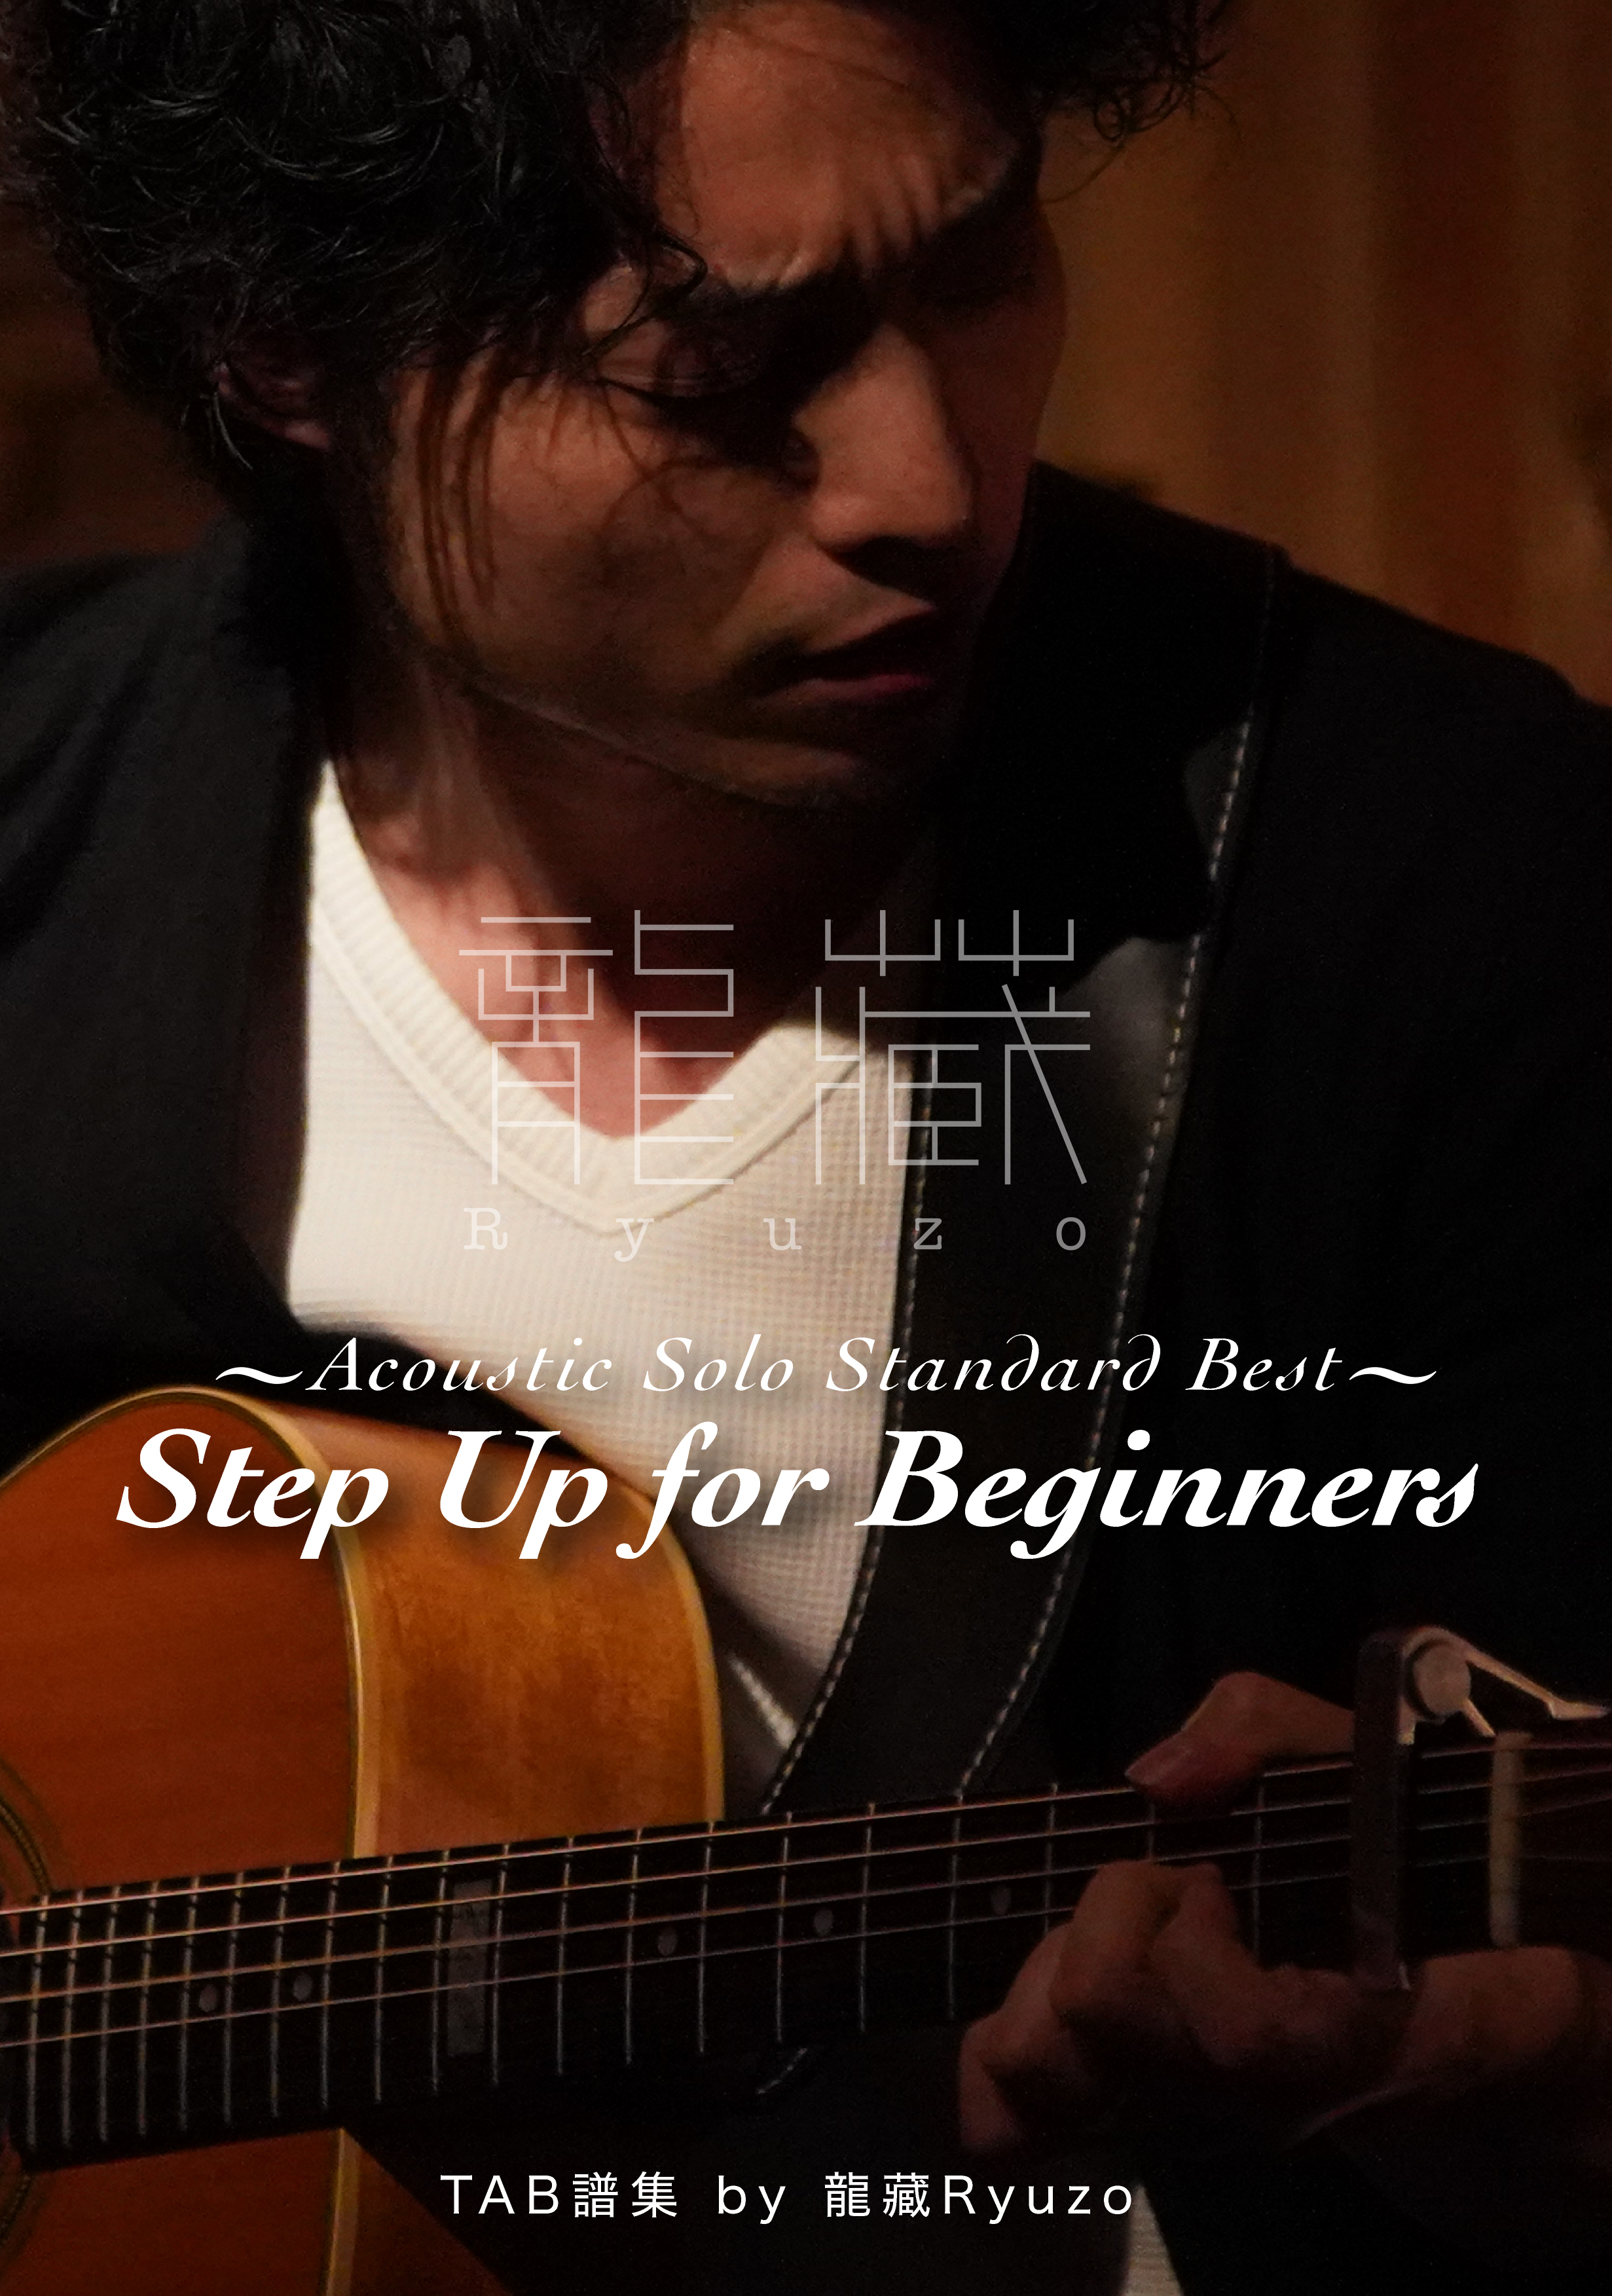 Step Up for Beginners〜Acoustic Solo Standard Best〜 TAB譜集 by 龍藏Ryuzo